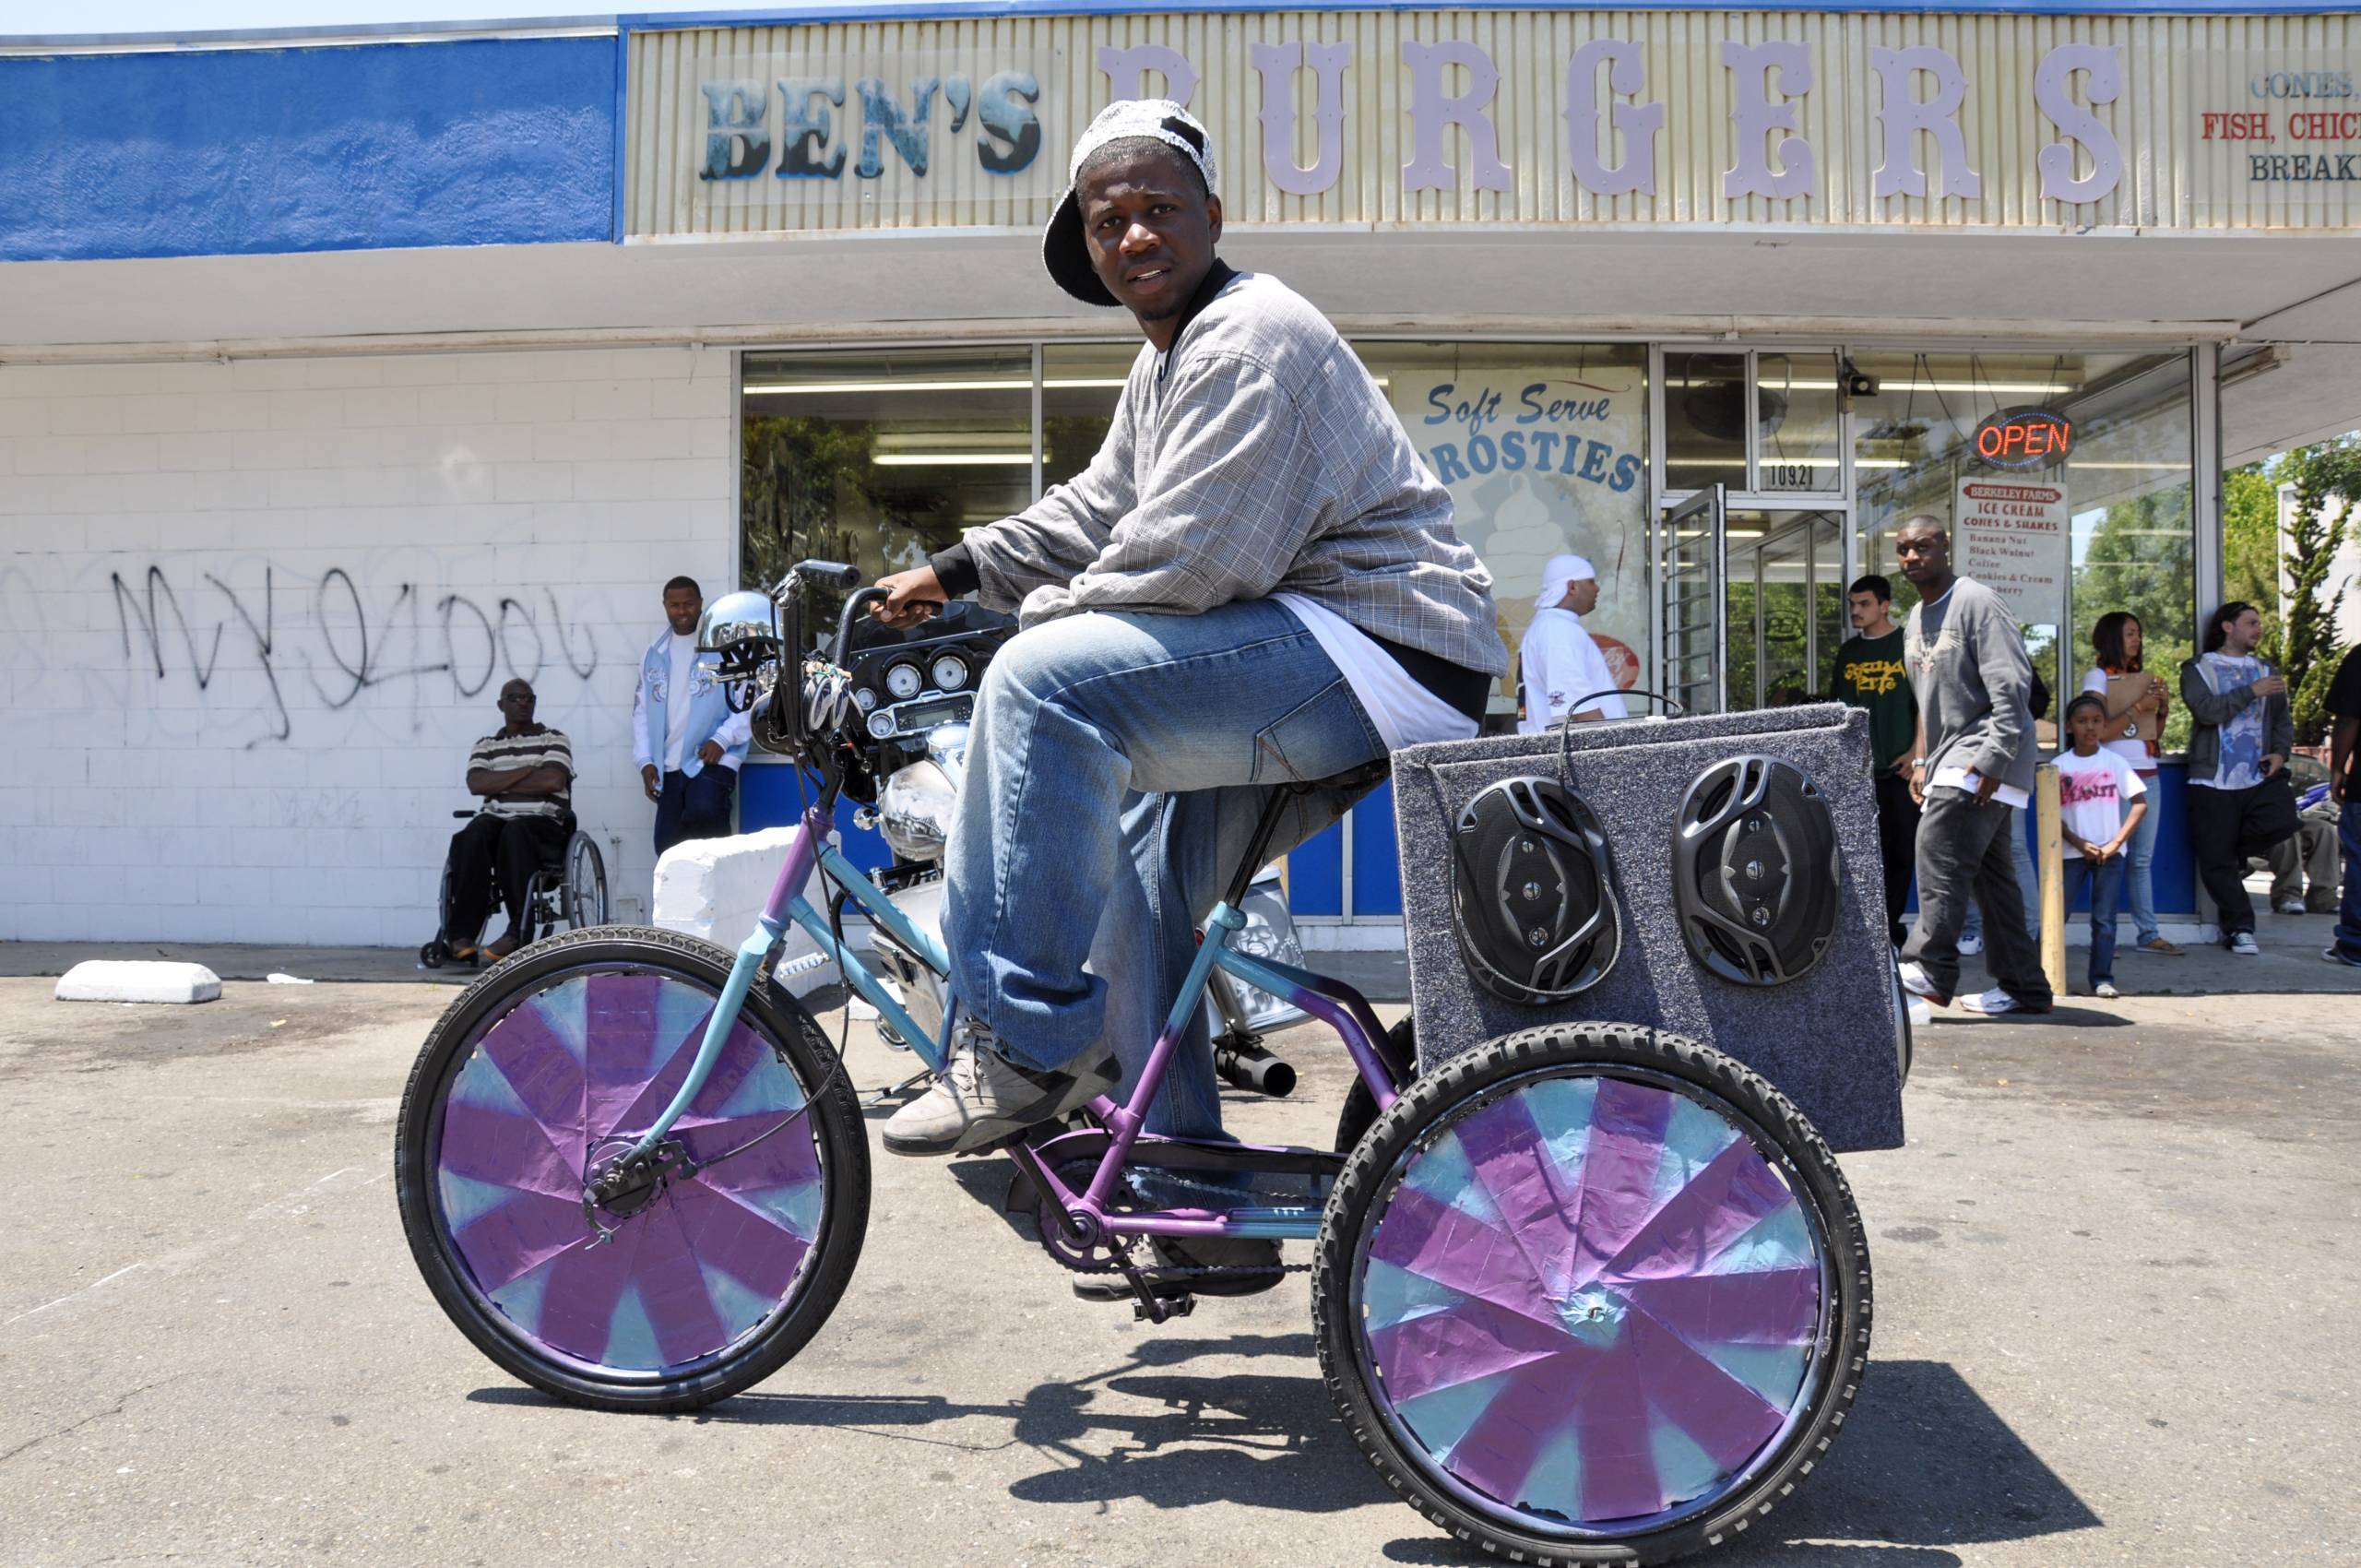 A scraper bike on the set of E-40's music video 'Tell Me When to Go' in 2006.